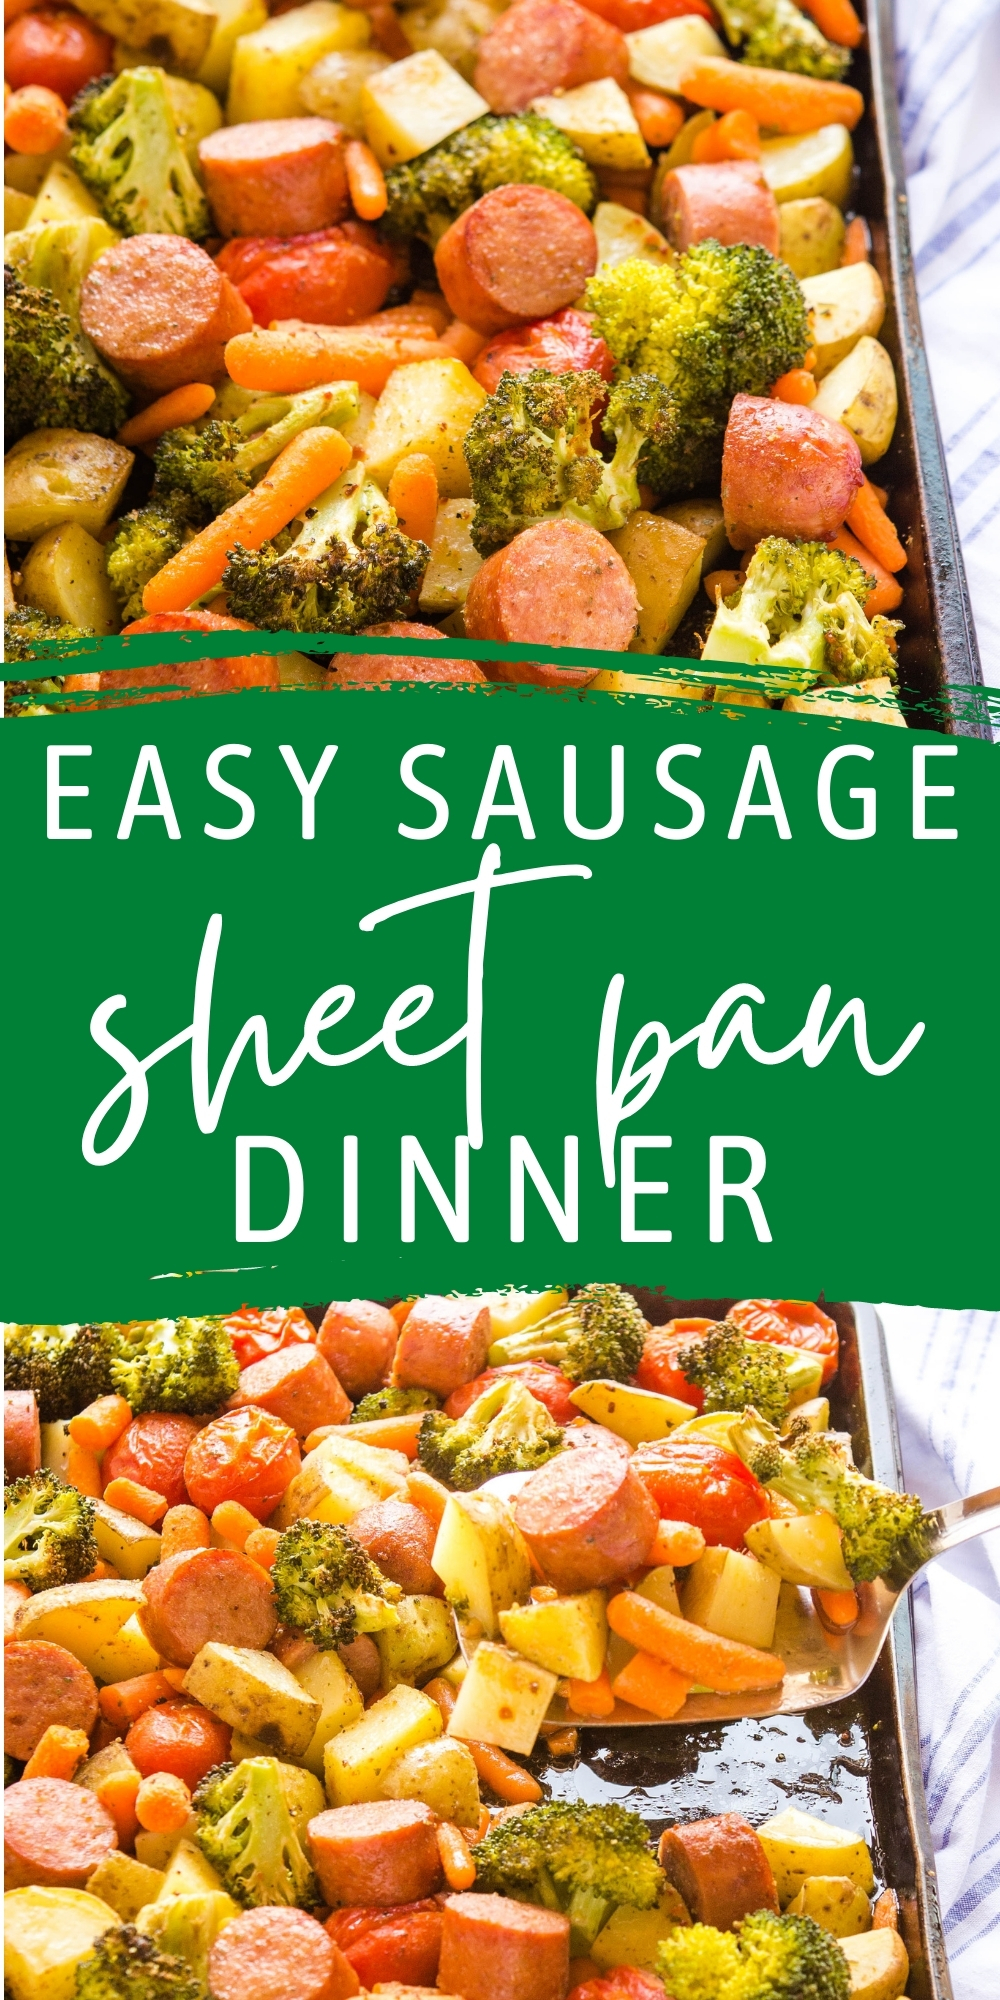 This Sausage Sheet Pan Dinner is packed with veggies and lean protein  - it's the perfect simple weeknight family meal made all in one pan! Recipe from thebusybaker.ca! #sheetpandinner #sausages #veggies #dinner #familymeal #weeknightmeal #sheetpanmeal #easyrecipe #supper via @busybakerblog